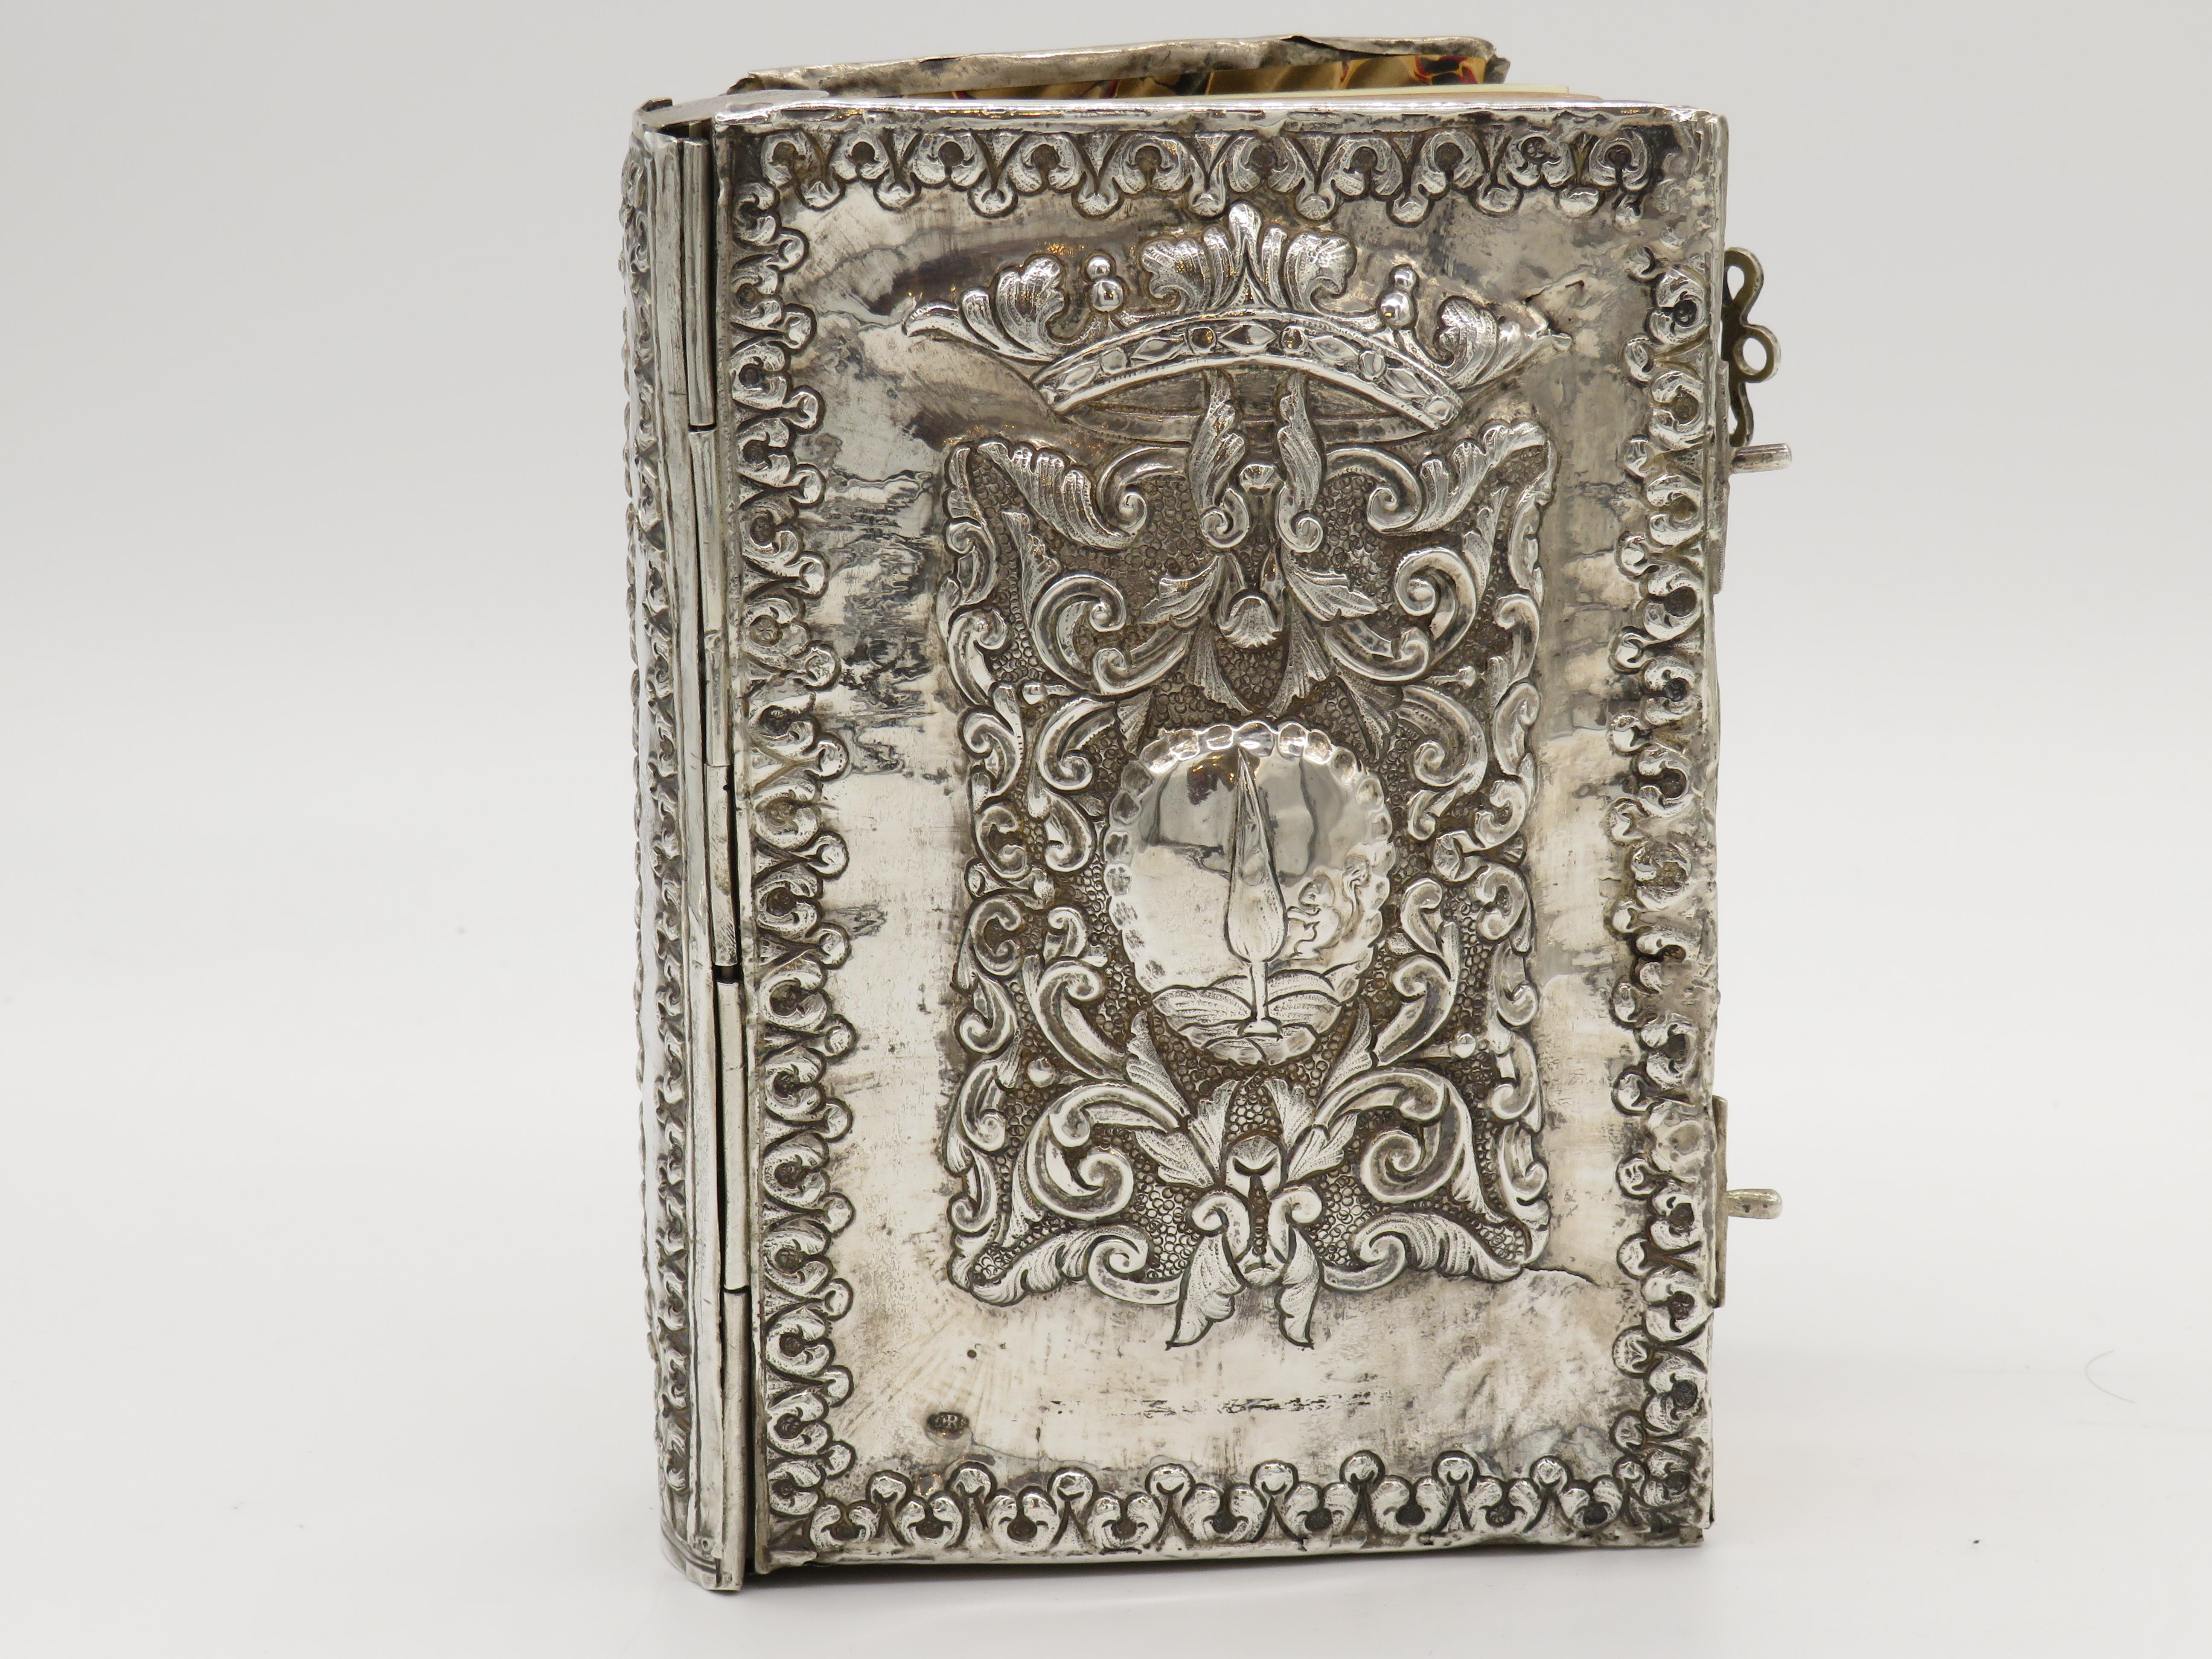 An 18th century Italian silver book binding. An impressively designed, this book binding is formed by two, nearly identical covers, each embossed with a panel of scrolling foliage topped by a coronet and enclosing armorials. Chased leaf-tip forms